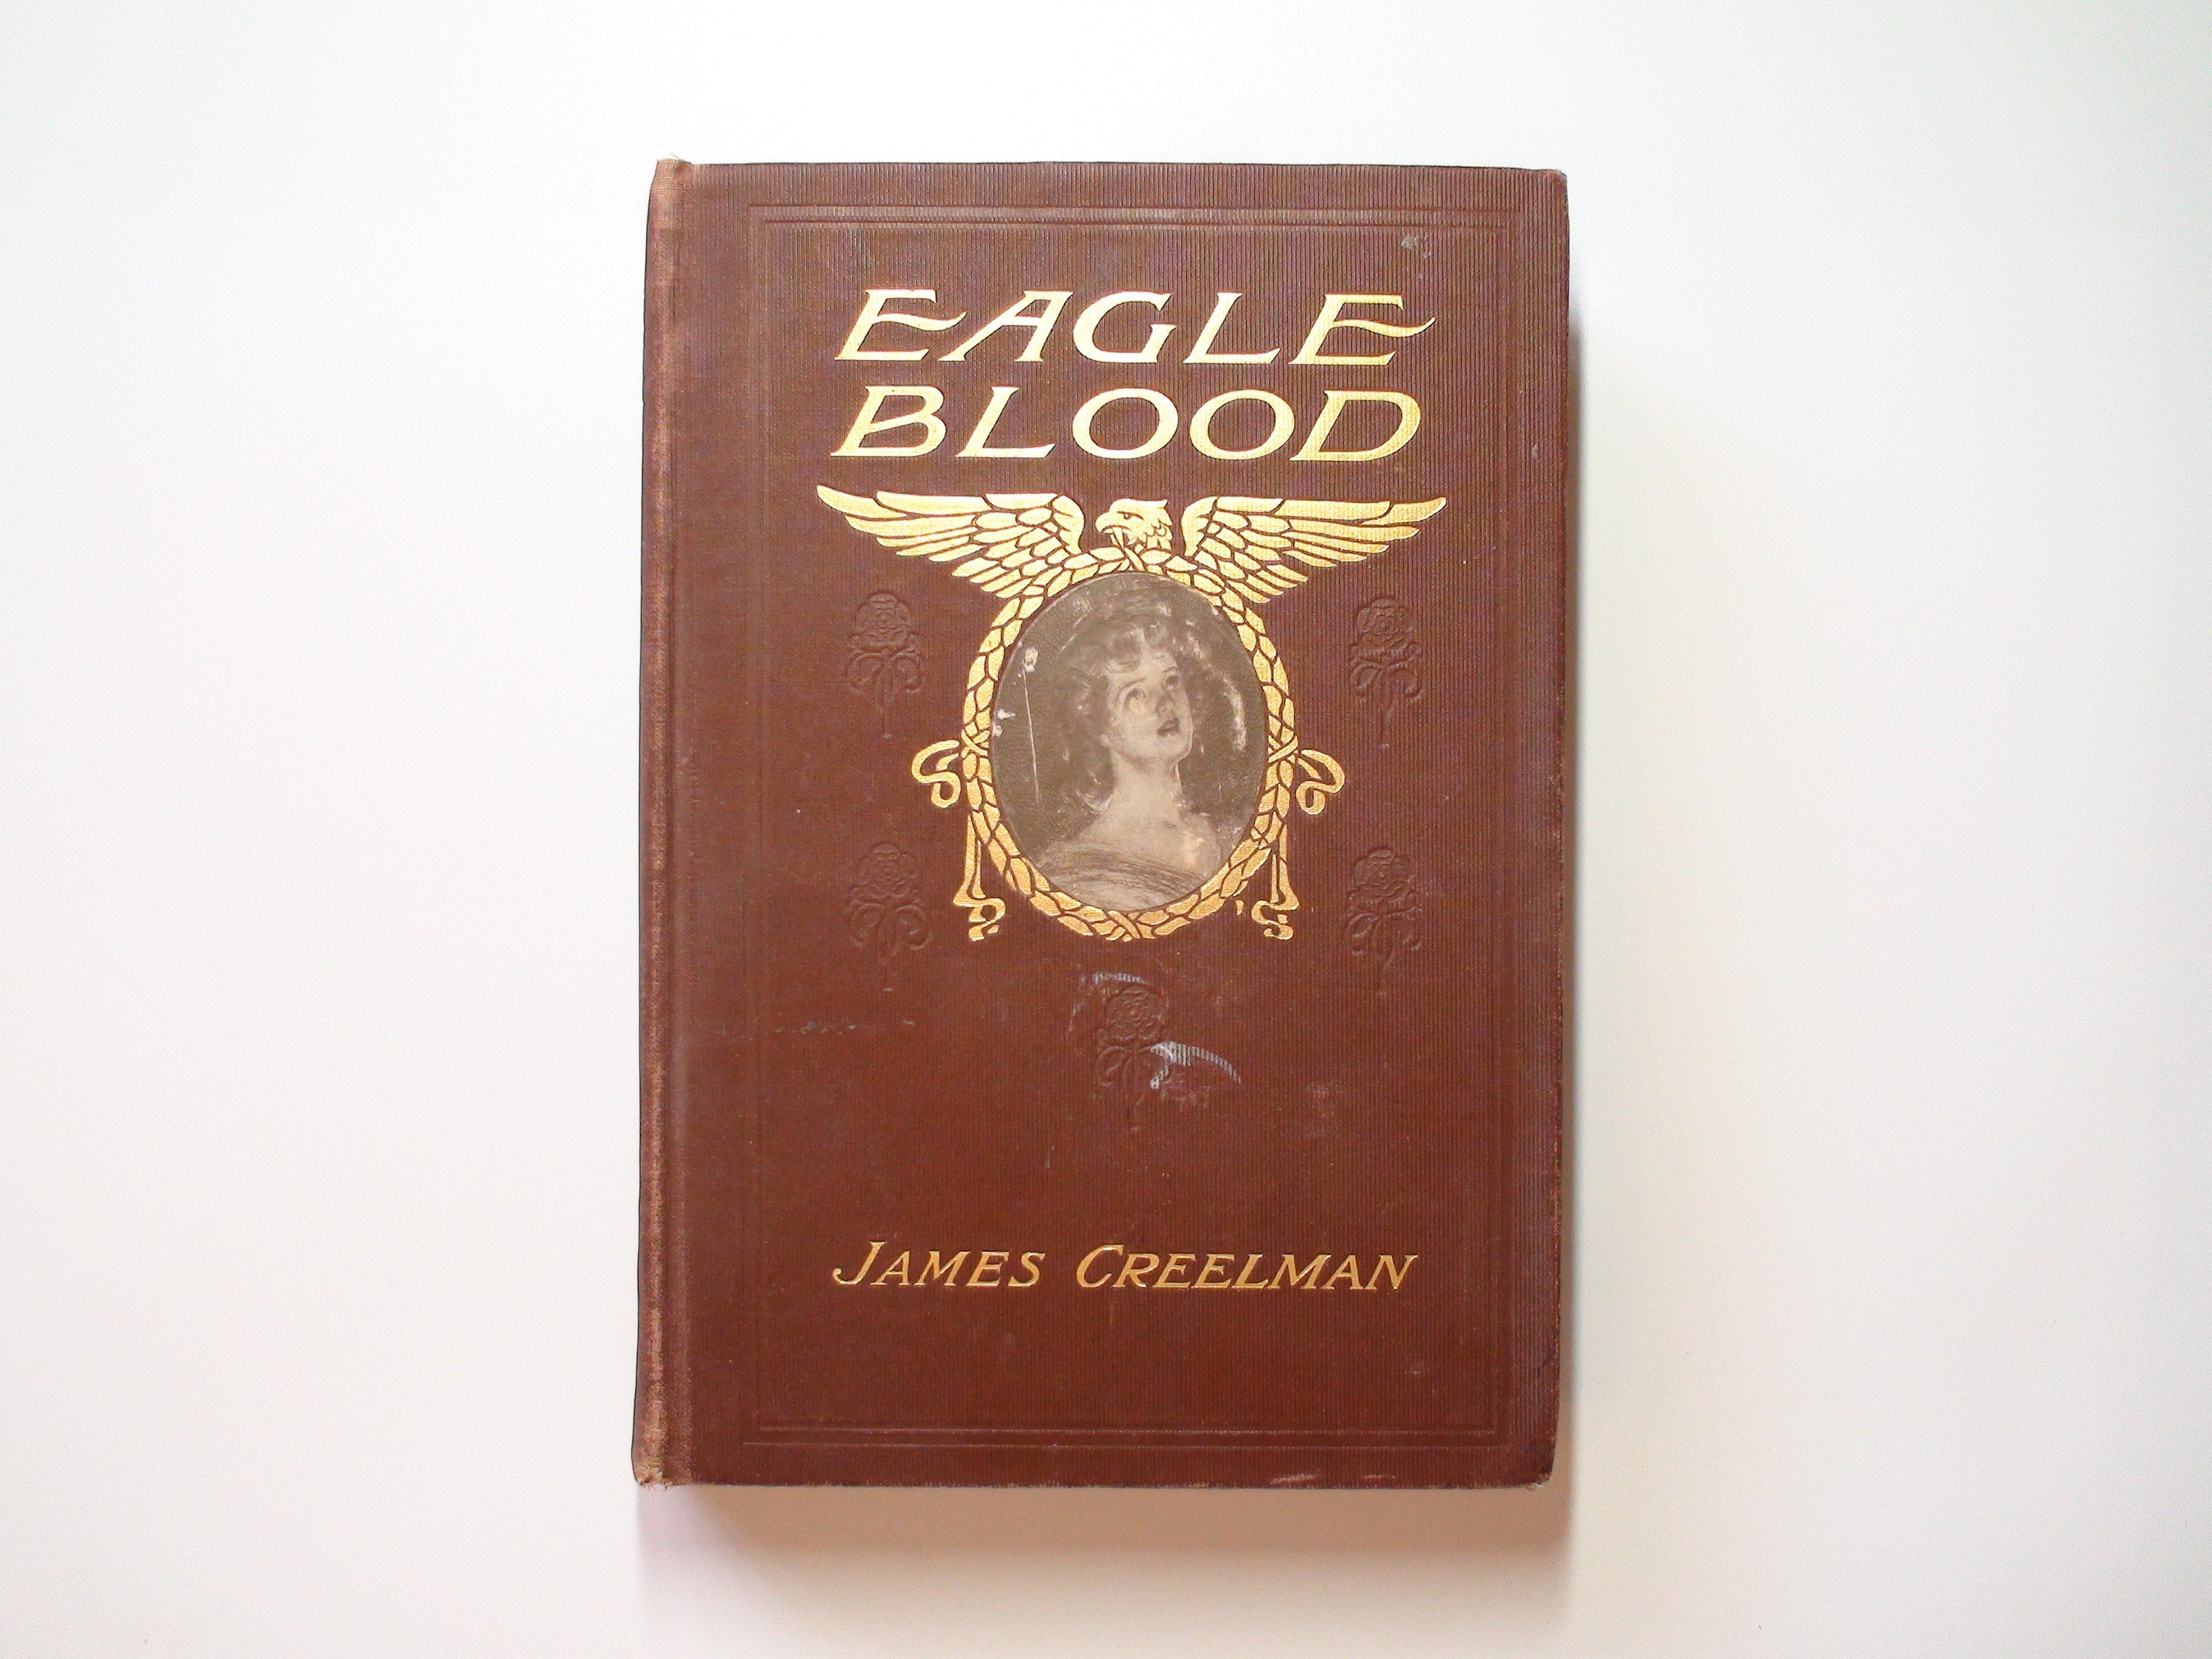 Eagle Blood, by James Creelman, Illustrated by Rose Cecil O'Neill, 1st Ed, 1902